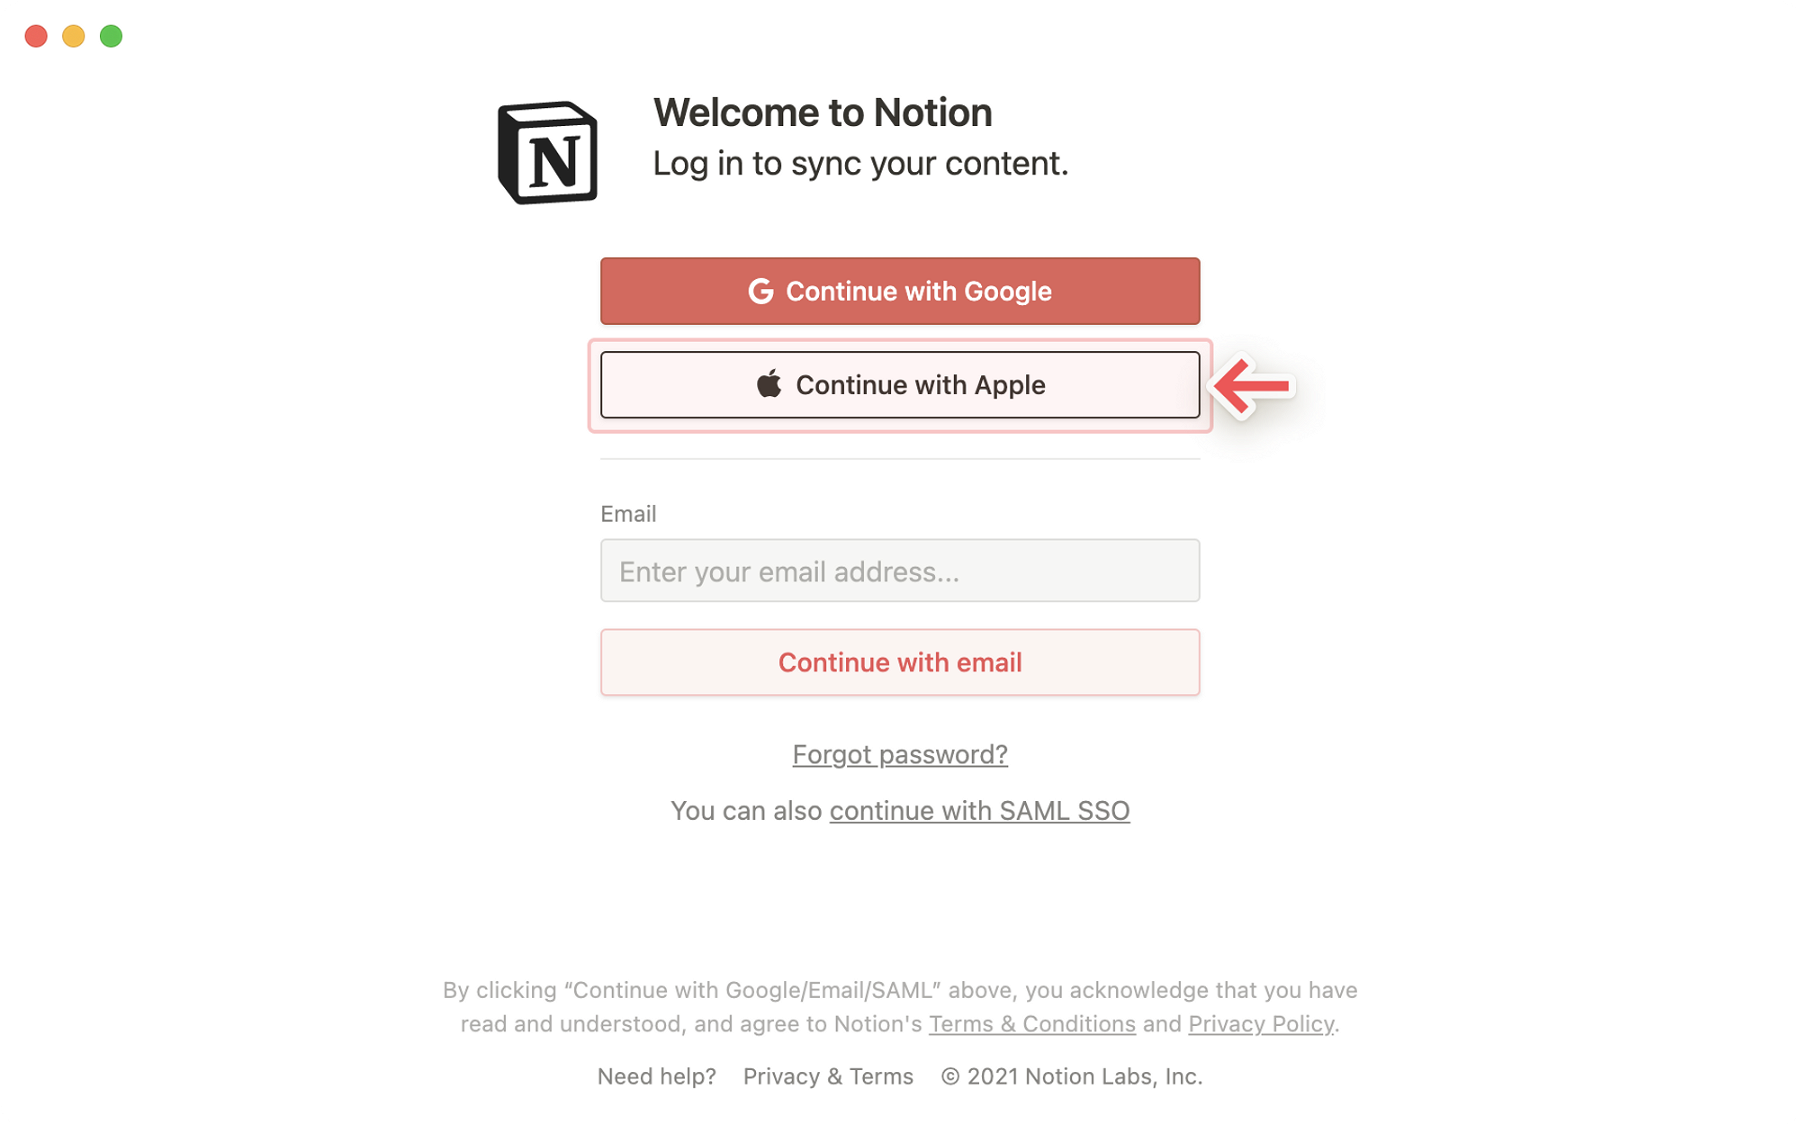 Notion vs WordPress: which is better for blogging?